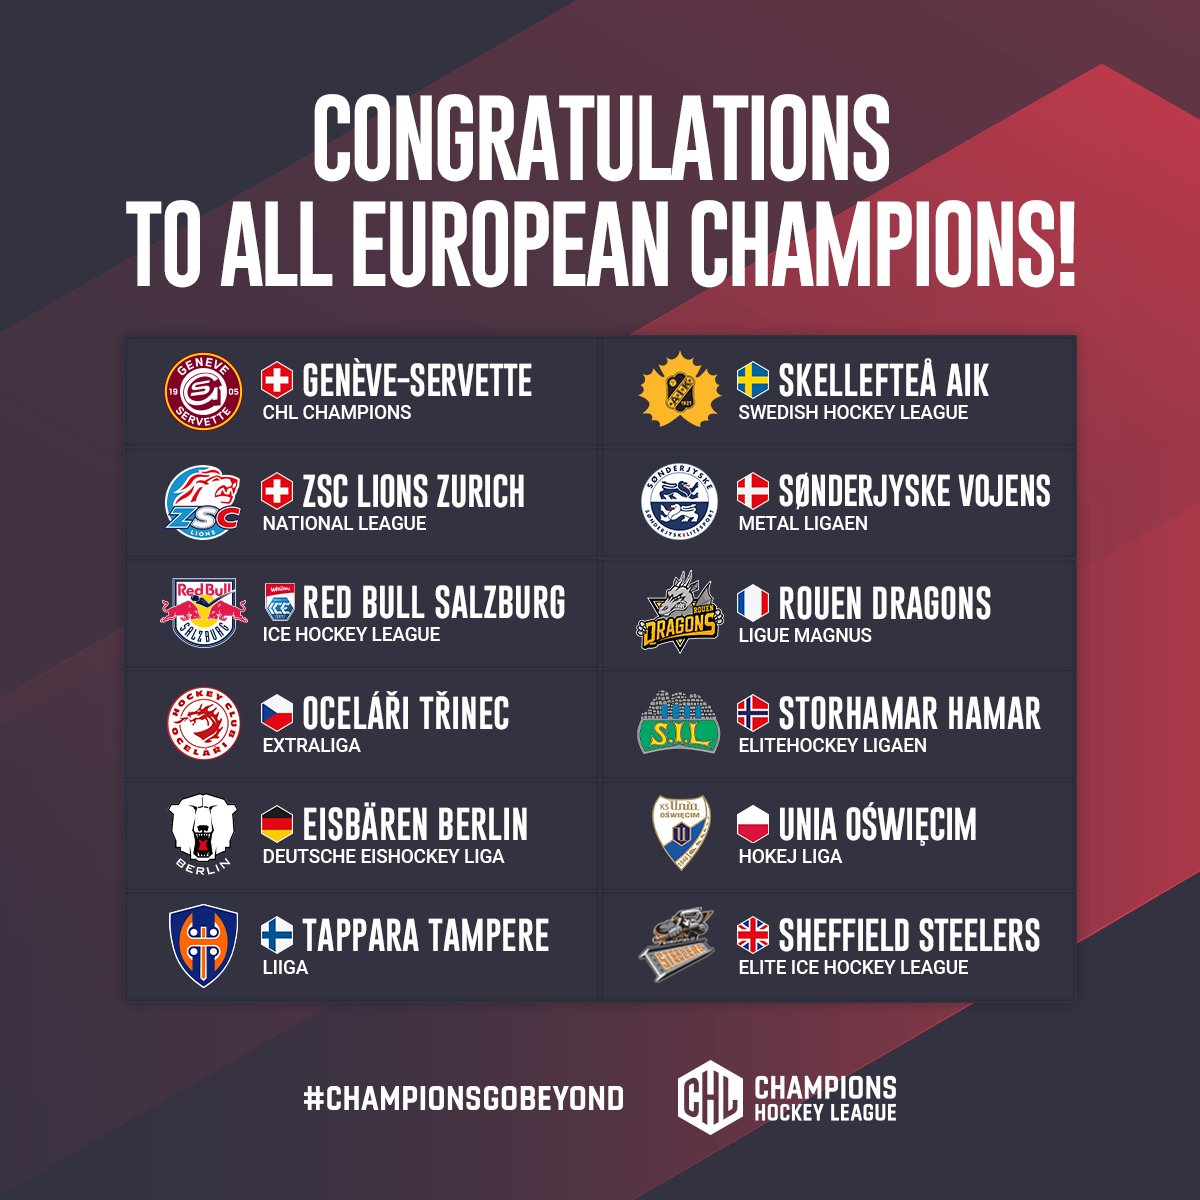 Now who will lift the European Trophy in 2024/25? 🏆 Can't wait to see you all battle it out in the upcoming season of Europe's 🌍 biggest club ice hockey competition 😎 #ChampionsGoBeyond